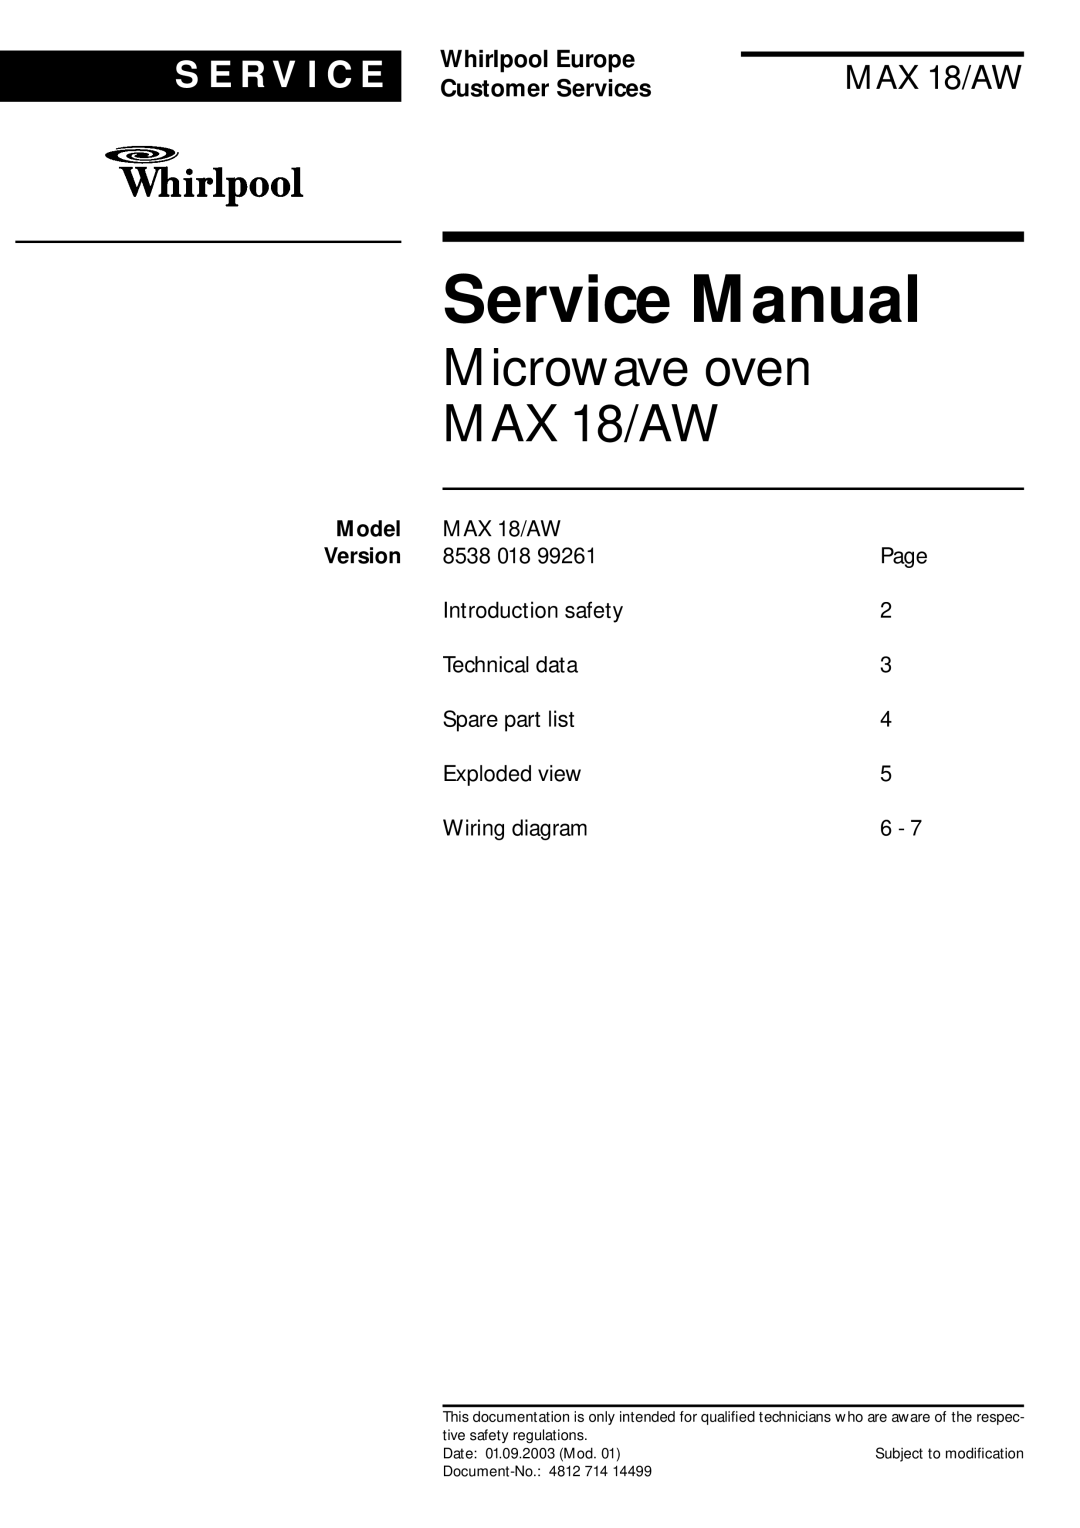 Whirlpool max, aw service manual Model, Microwave oven MAX 18/AW, S E R V I C E, Whirlpool Europe, Customer Services 